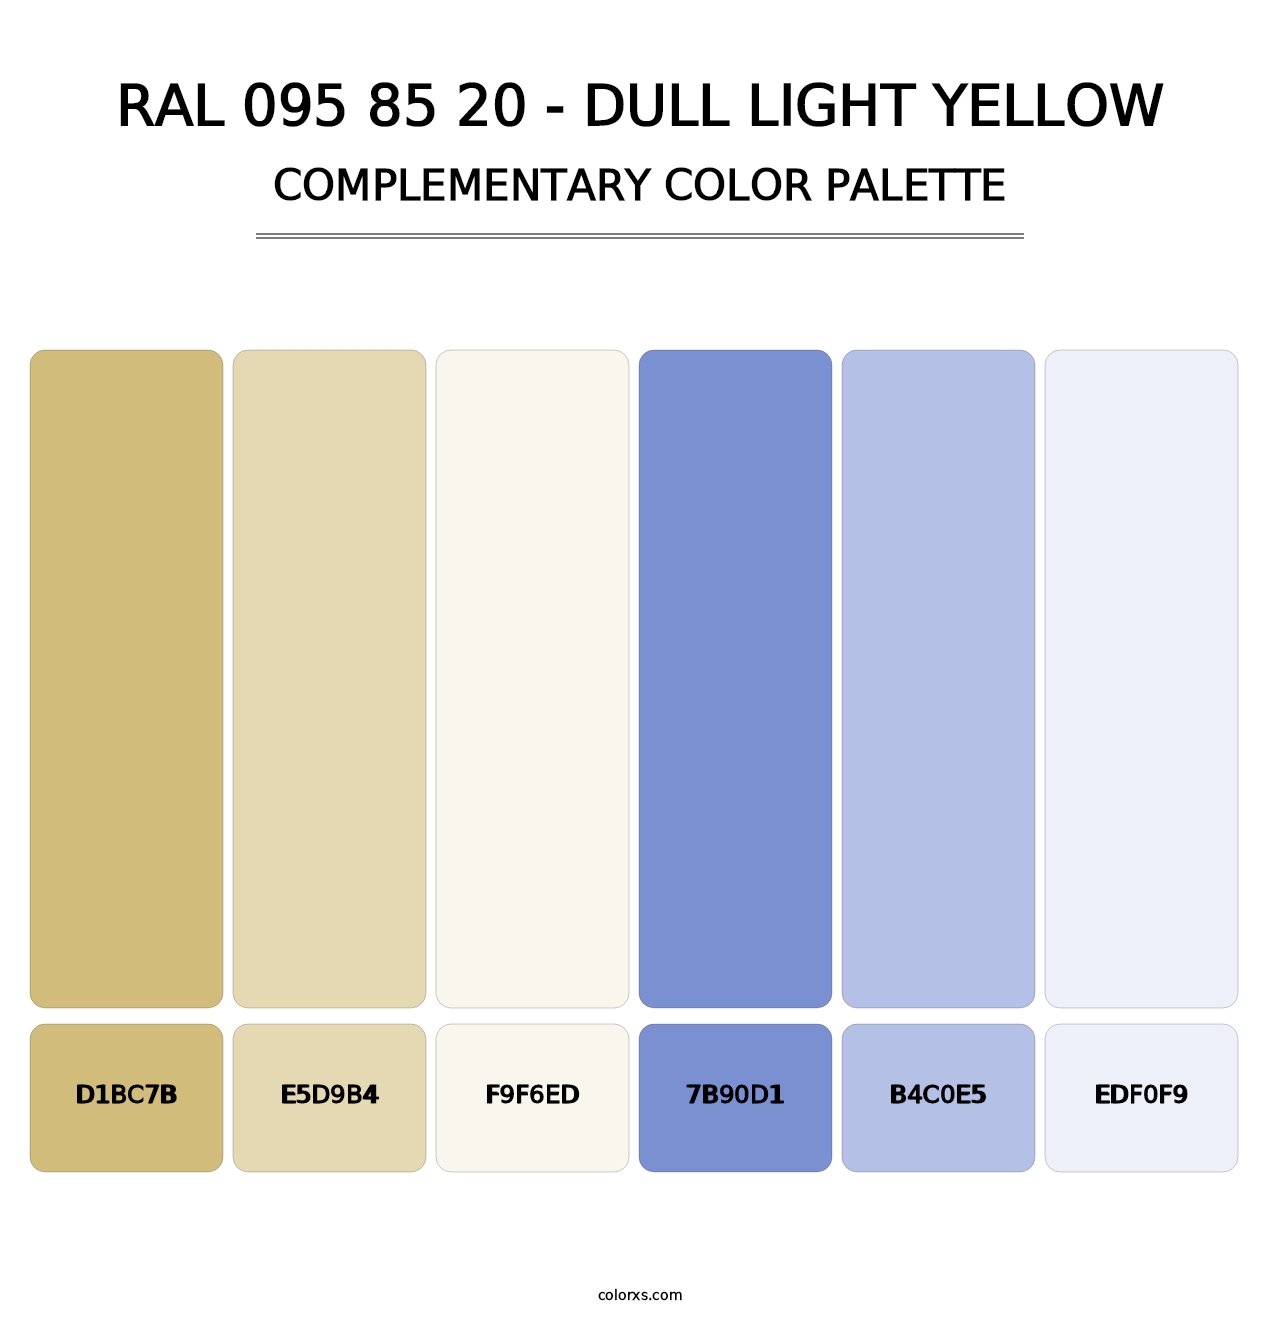 RAL 095 85 20 - Dull Light Yellow - Complementary Color Palette